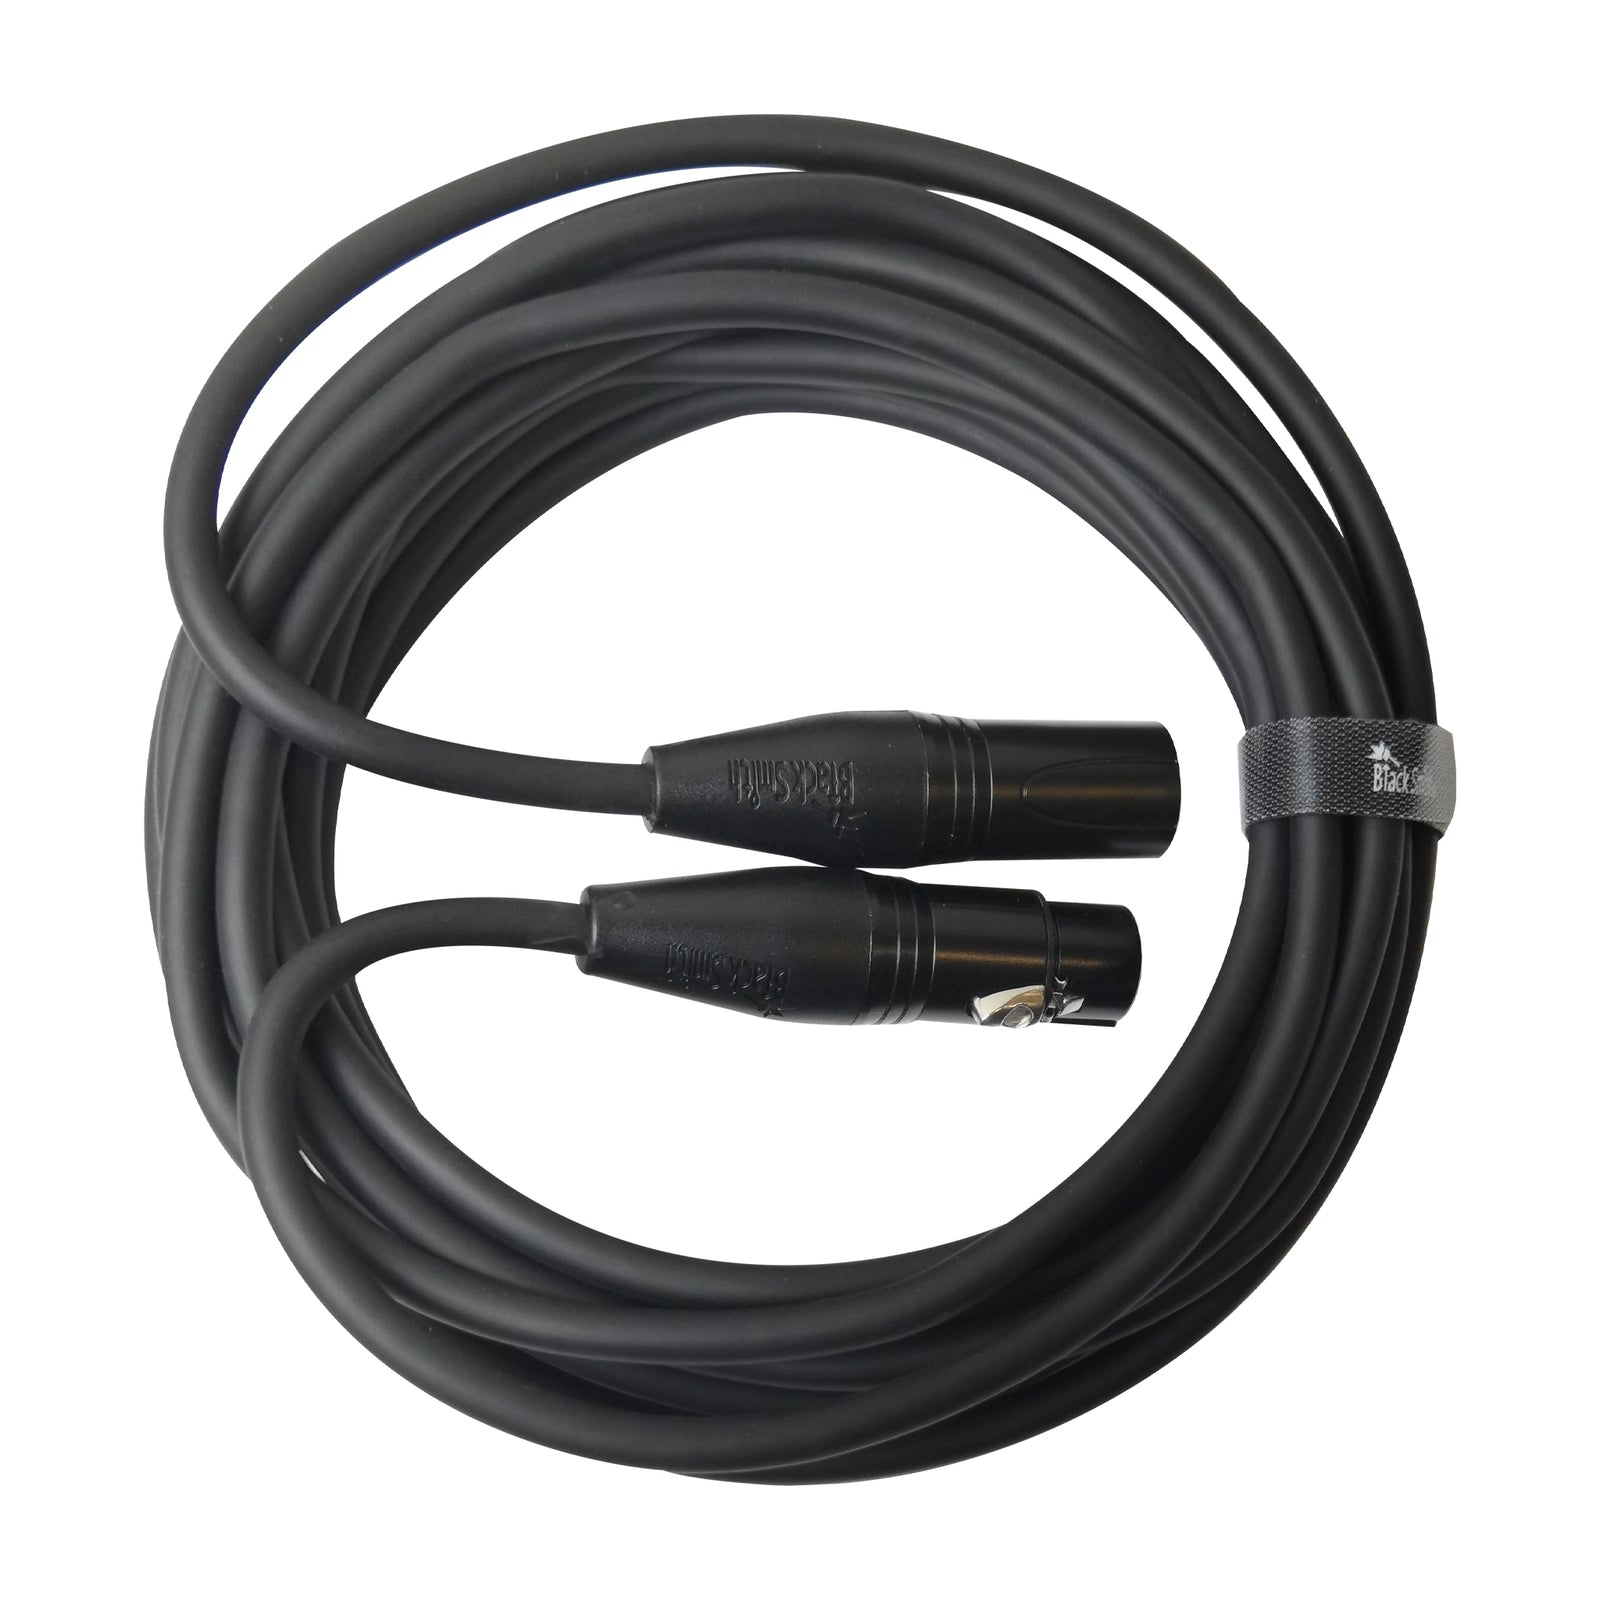 Black Smith Vocalist Series Microphone Cable 6m - XLR (Female) to XLR (Male)